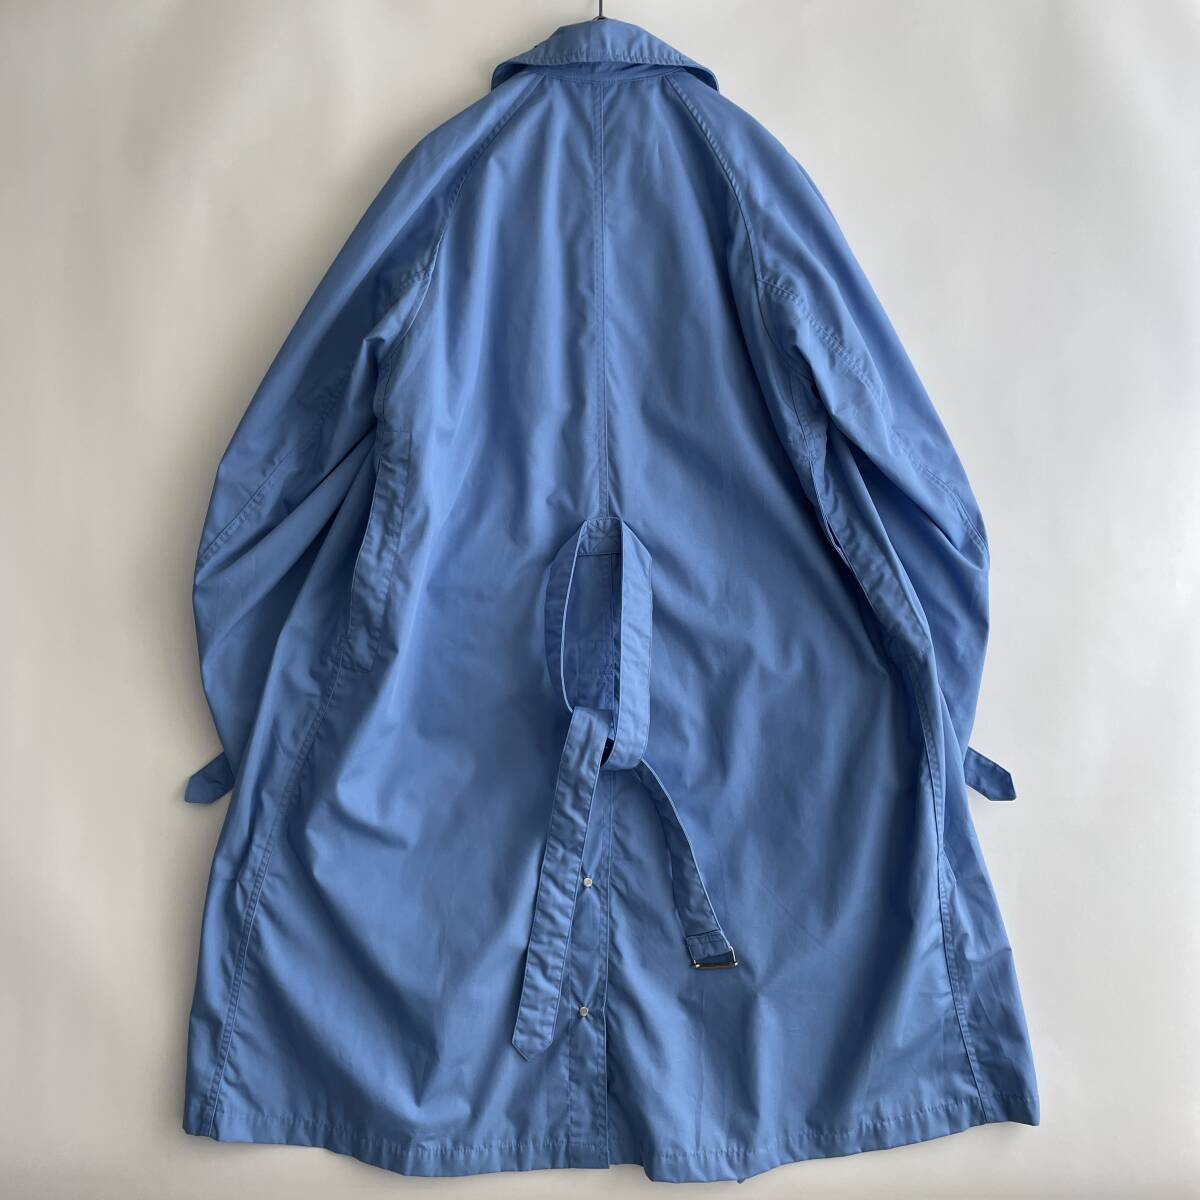 [ the first period / rare ] beautiful goods ENGINEERED GARMENTS -Riding Coat- size/S (pd) spring summer largish over coat lai DIN g motorcycle USA made 